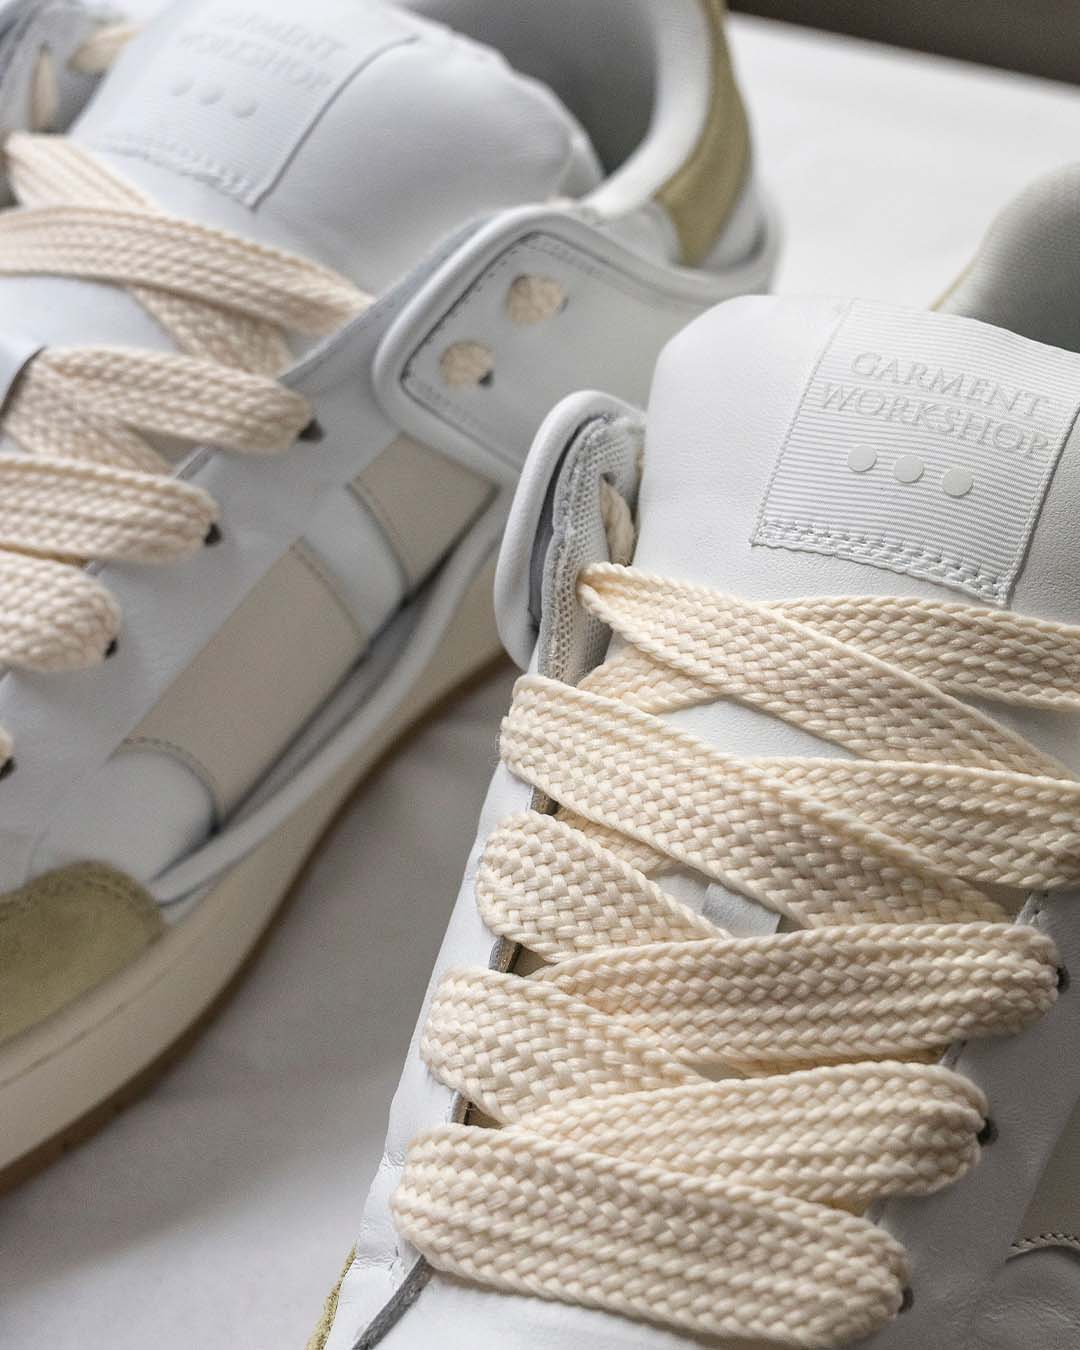 LACES CLOSE UP.jpg image from LEATHER S01 PR0 SNEAKERS RAL7000STUDIO project created on 2022-12-12